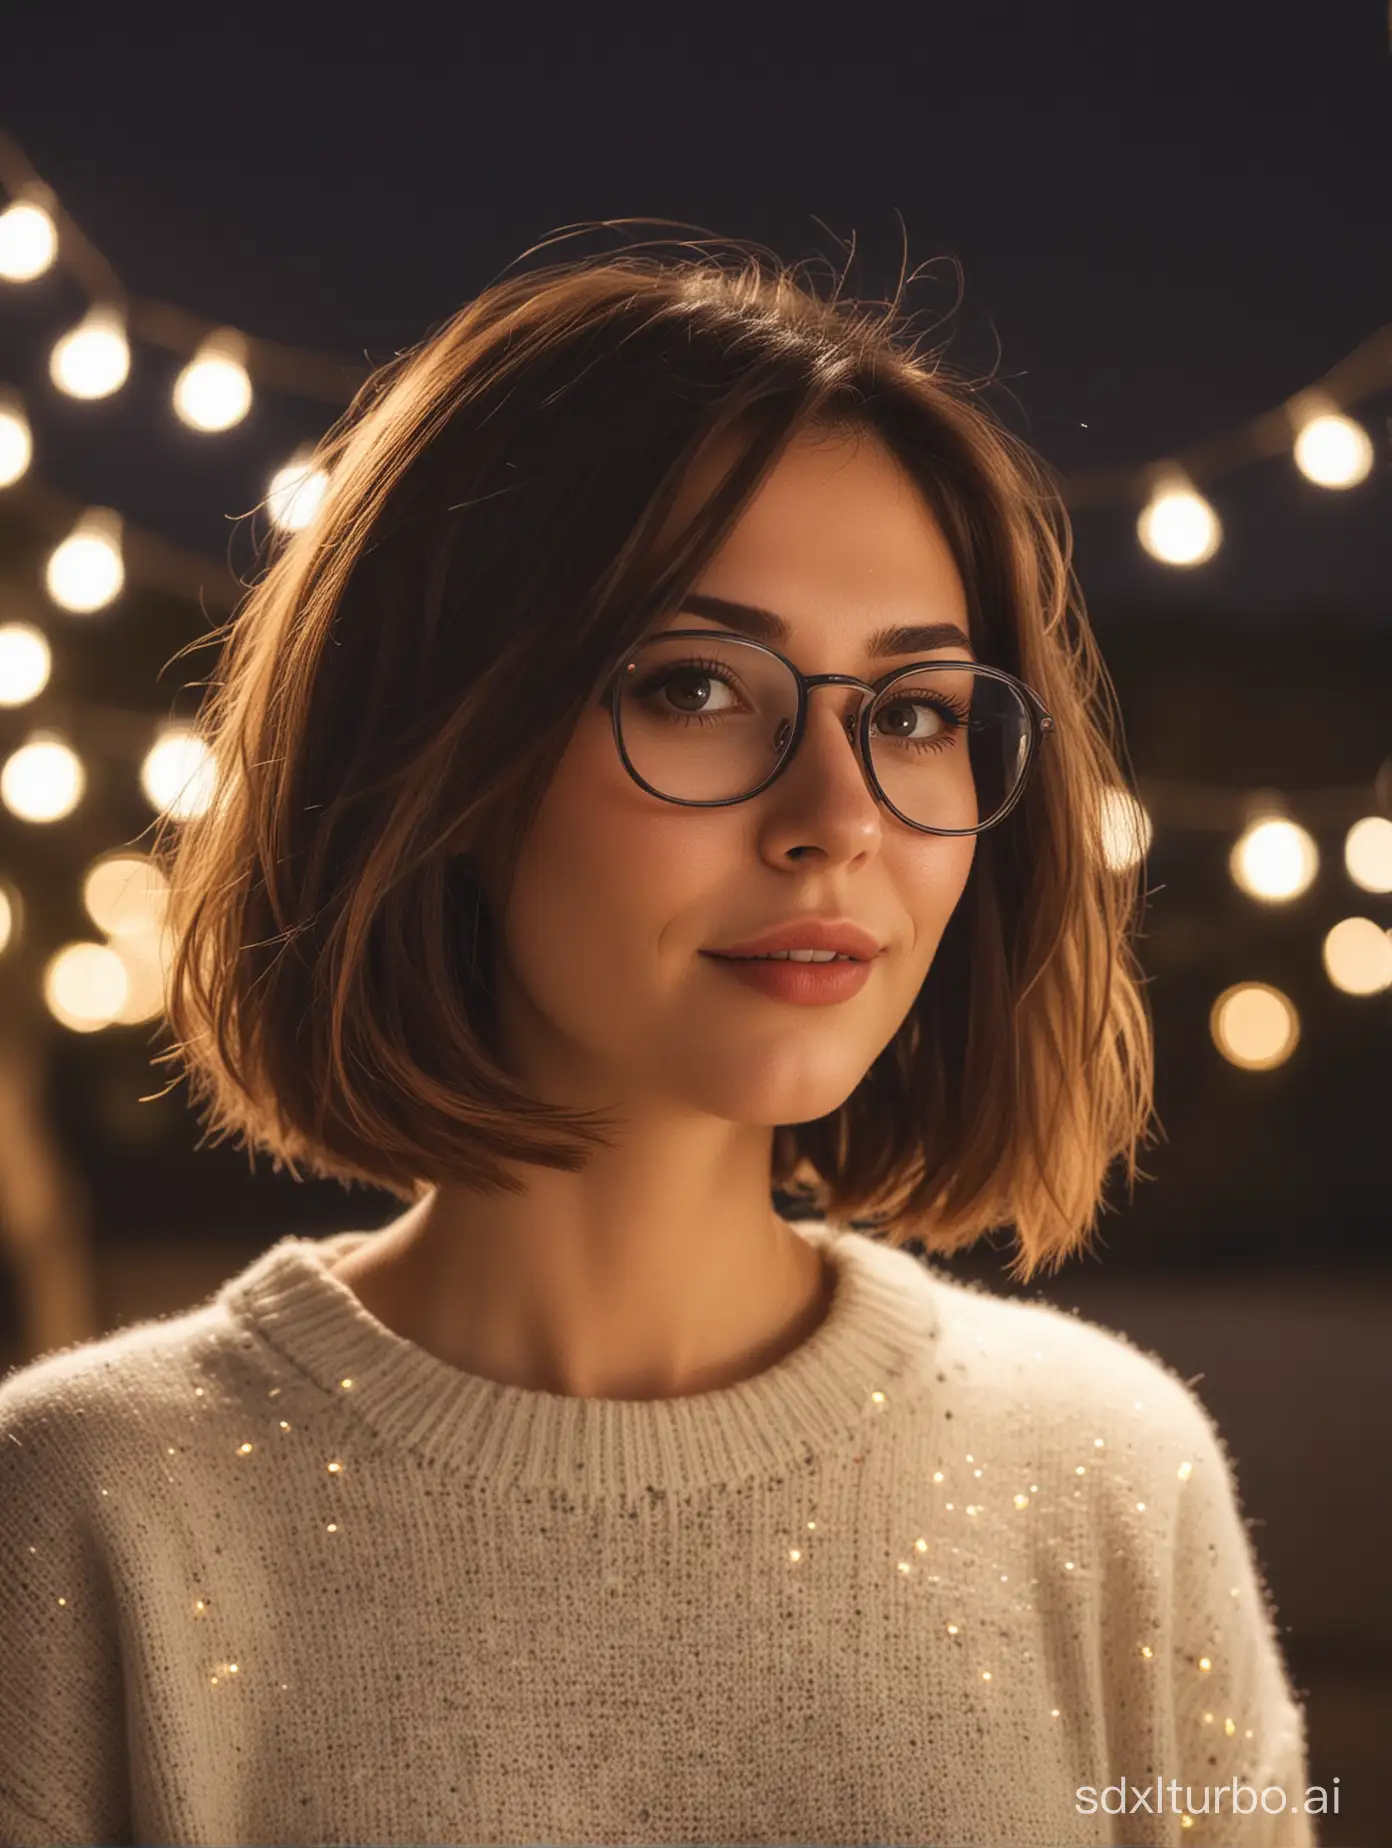 a very beautiful 27 year old girl in a sweater with lights in the open air with soft, angular bob hair with specs